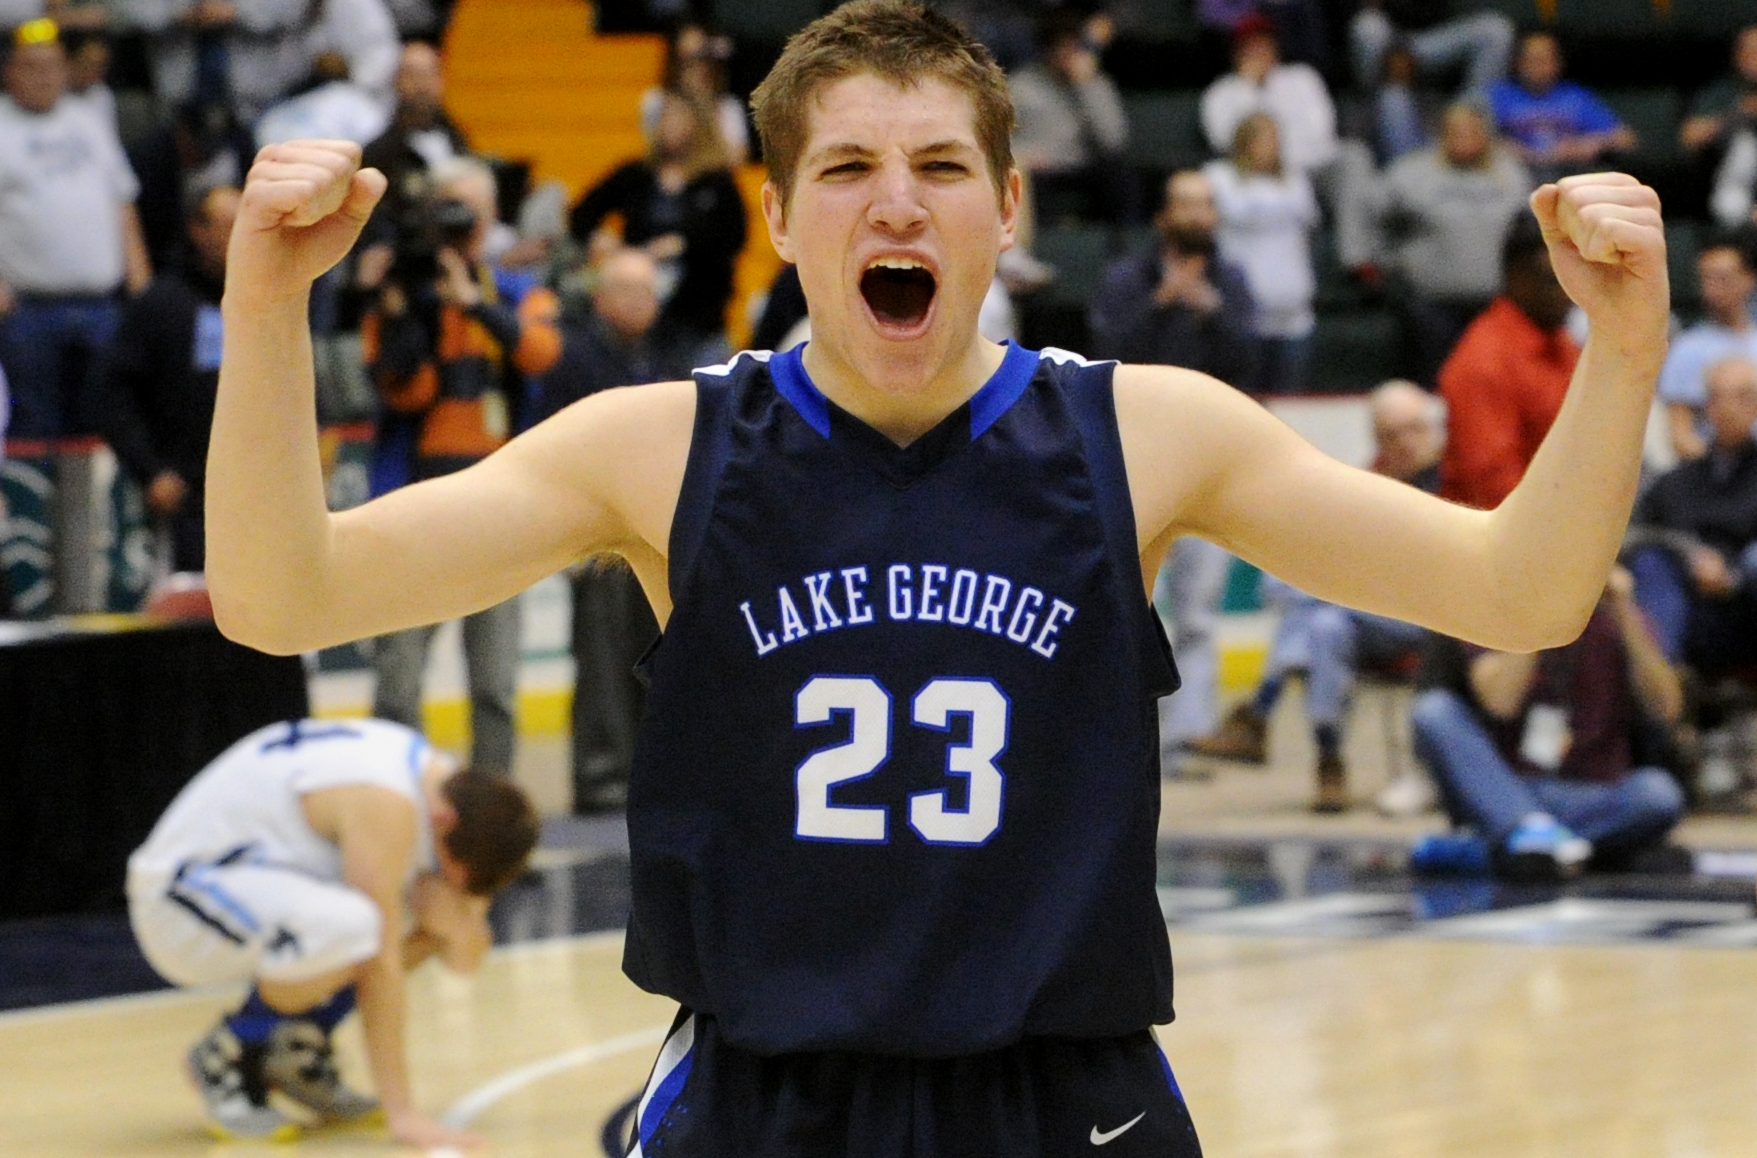 Lake George senior Greg Rosenthal celebrates his team\'s 68-61 overtime victory as a Moravia player reacts to losing in the Class C semifinal game of the State Boys Basketball Tournament at the Glens Falls Civic Center on Friday, March 15, 2013. Lake George will play Pine Plains in the championship game on Saturday at 7:15 p.m.(Jason McKibben - jmckibben@poststar.com)